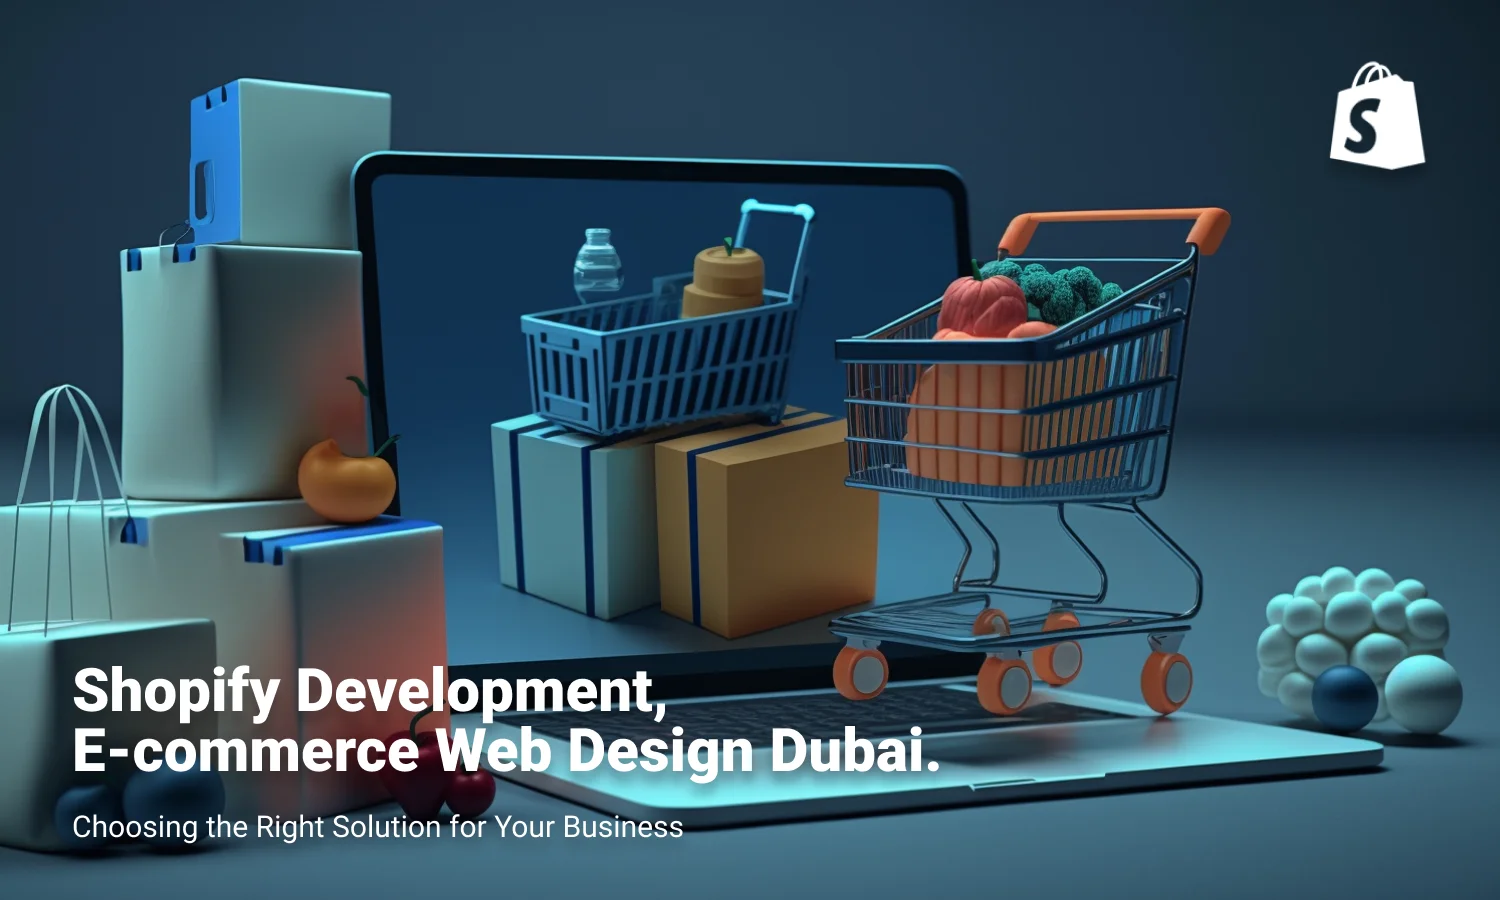 thriving-in-the-digital-marketplace-a-comprehensive-guide-to-e-commerce-websites-and-apps-development-in-dubai-introduction.webp